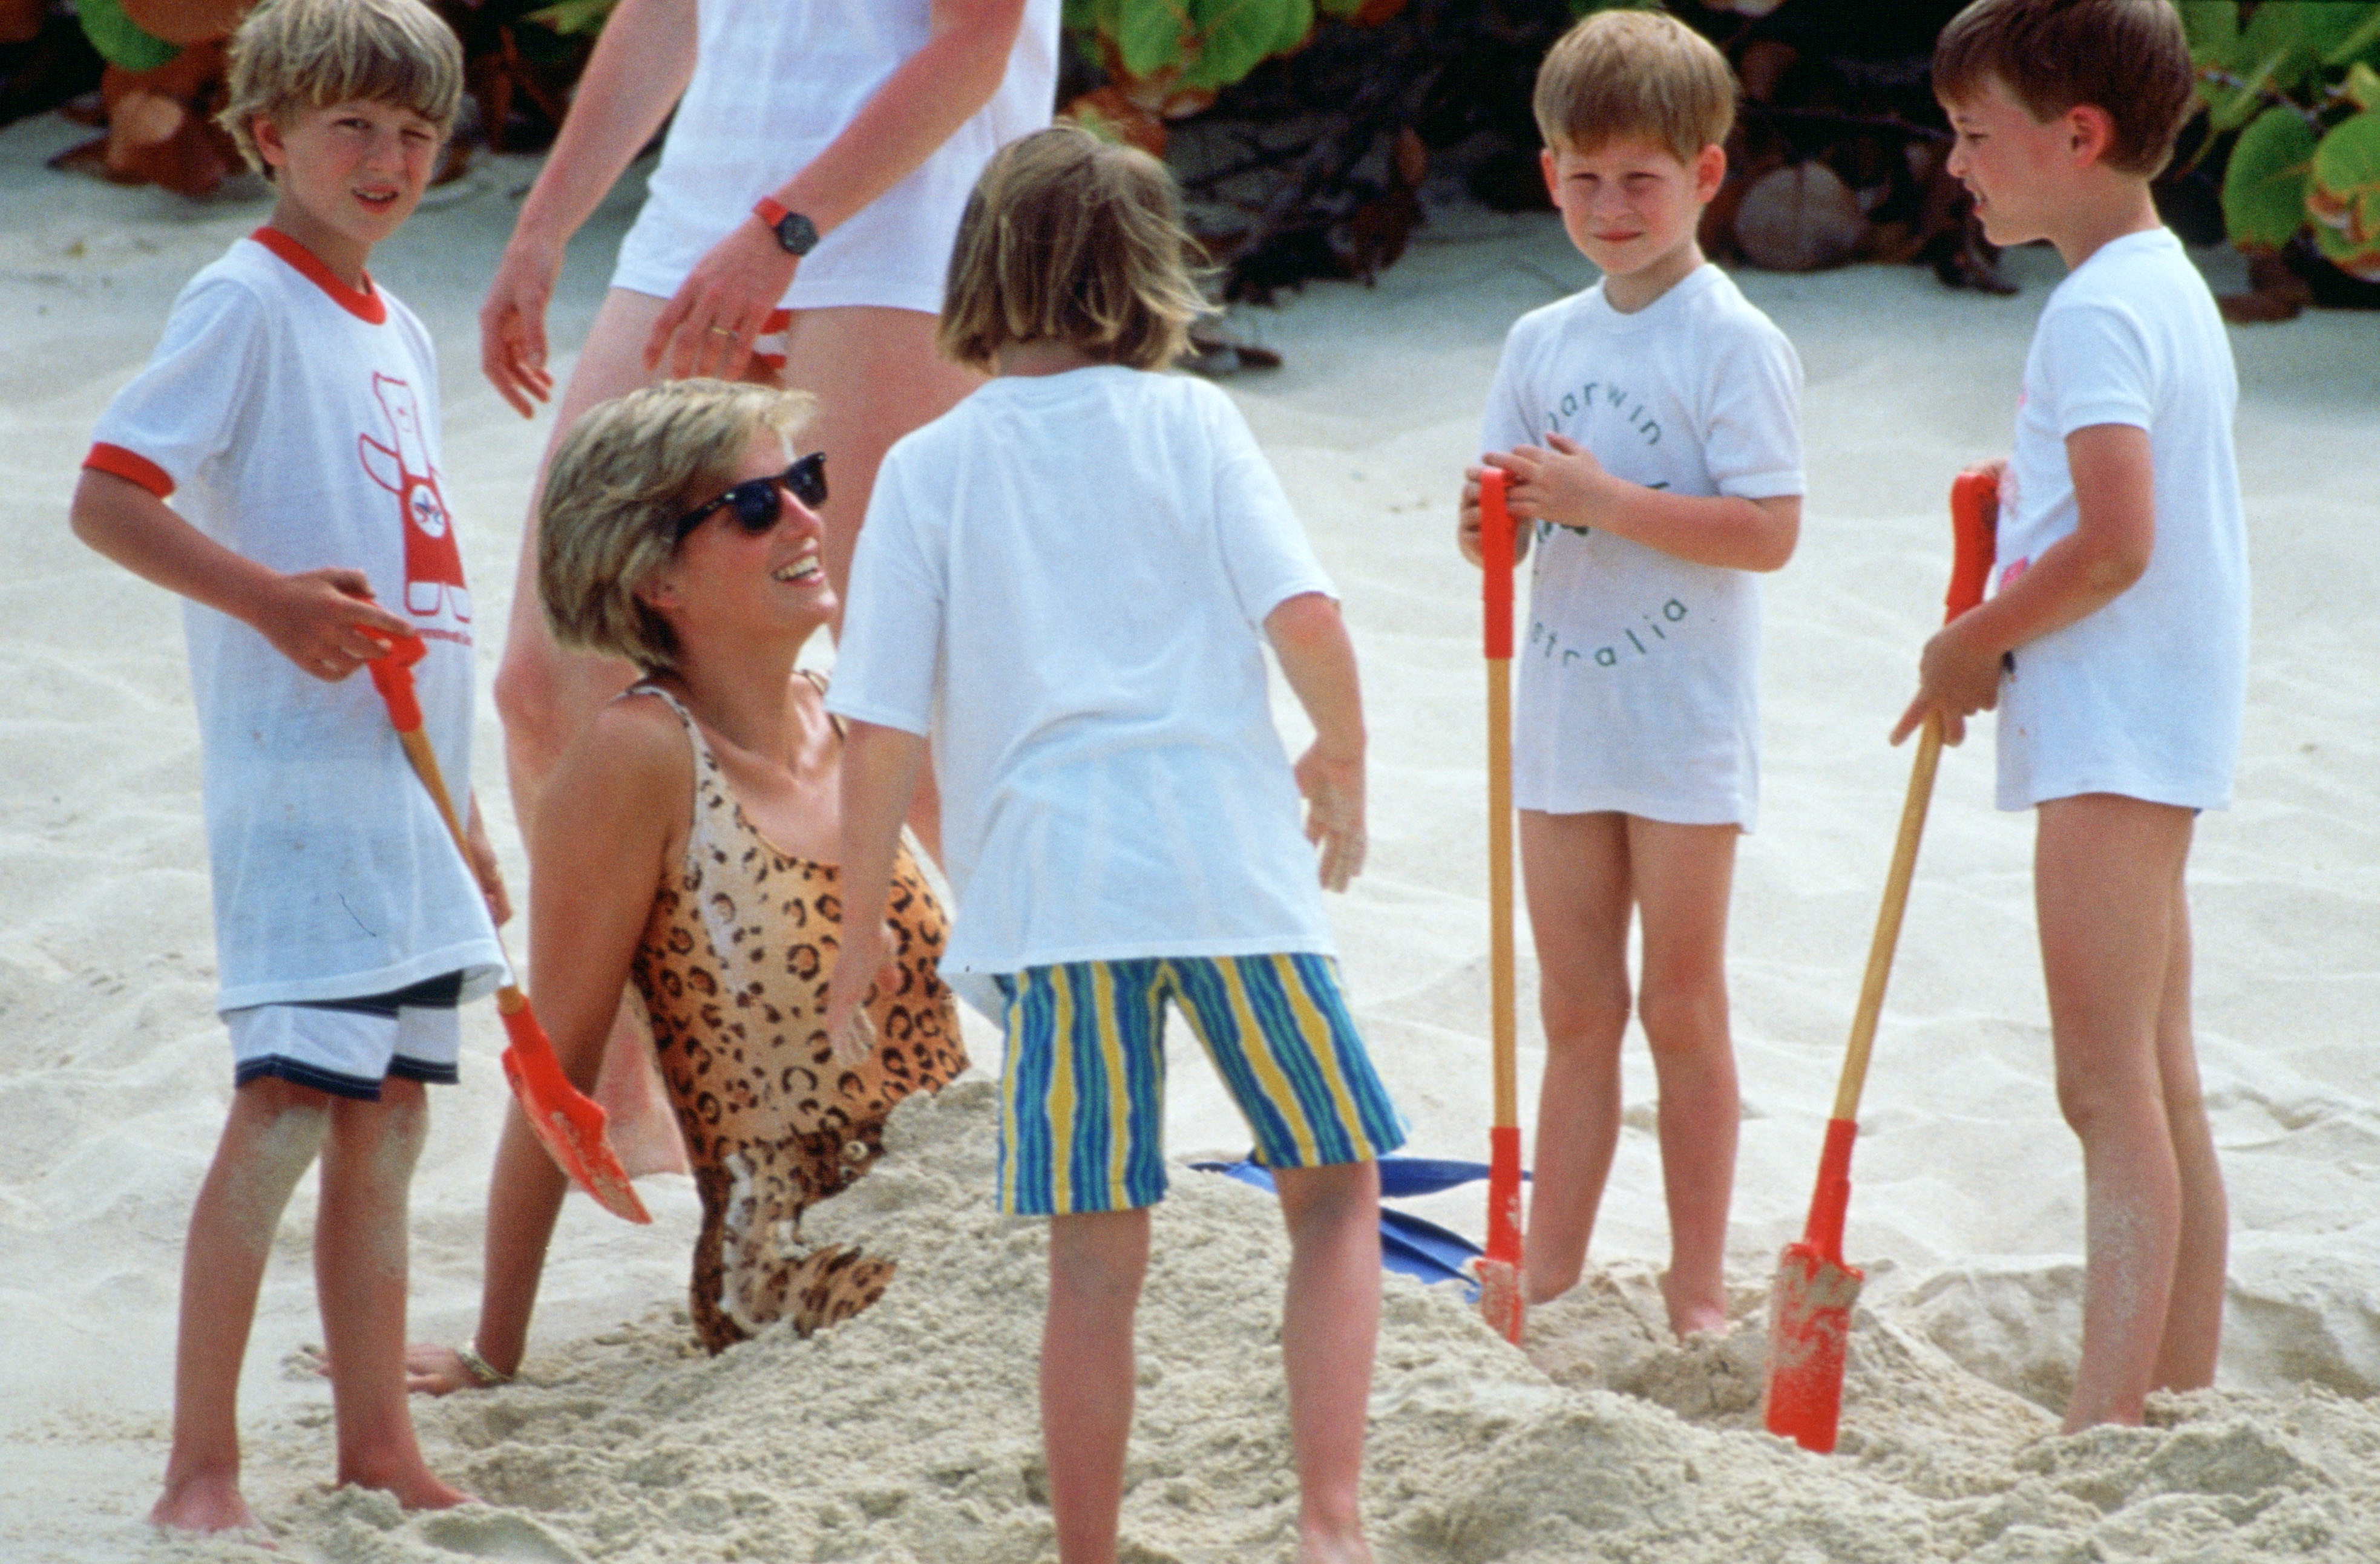 Diana, Princess of Wales with her sons and her sister's children on April 11, 1990 in Necker Island | Source: Getty Images